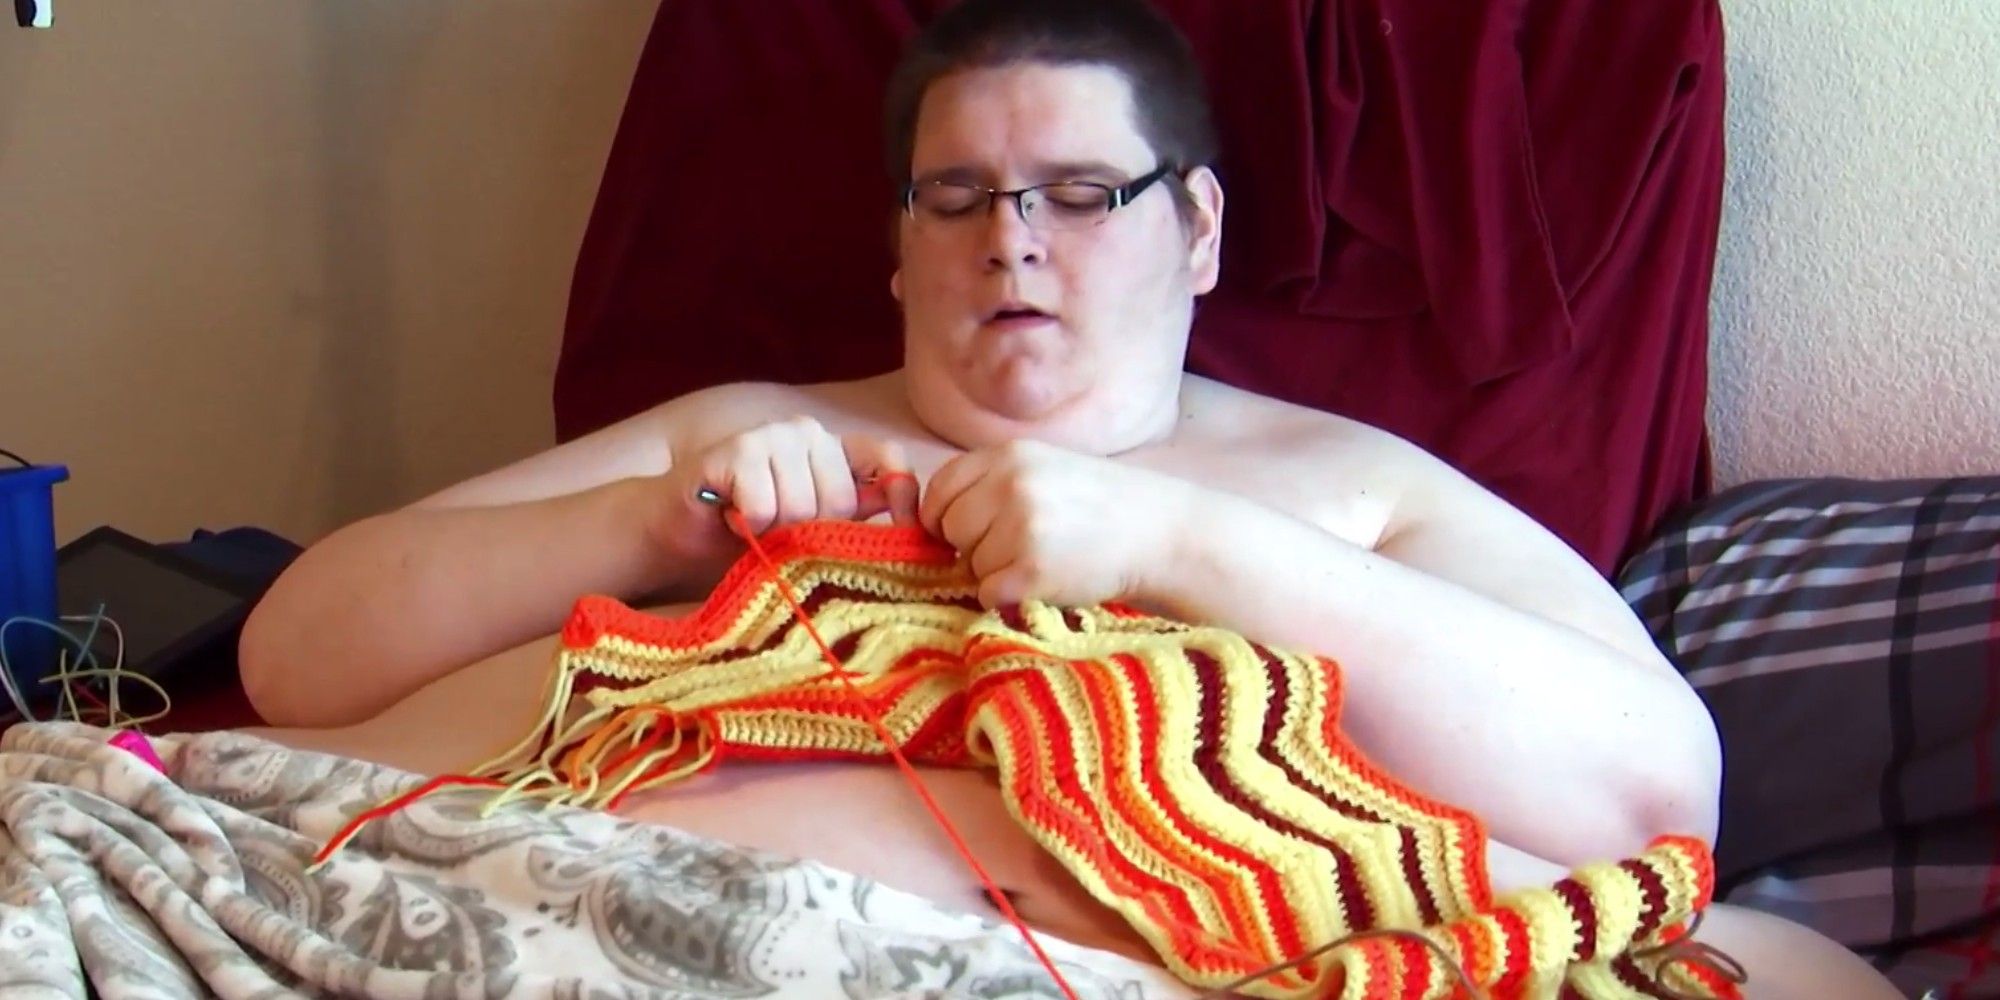 sean milliken my 600 lb life in bed crocheting CROPPED